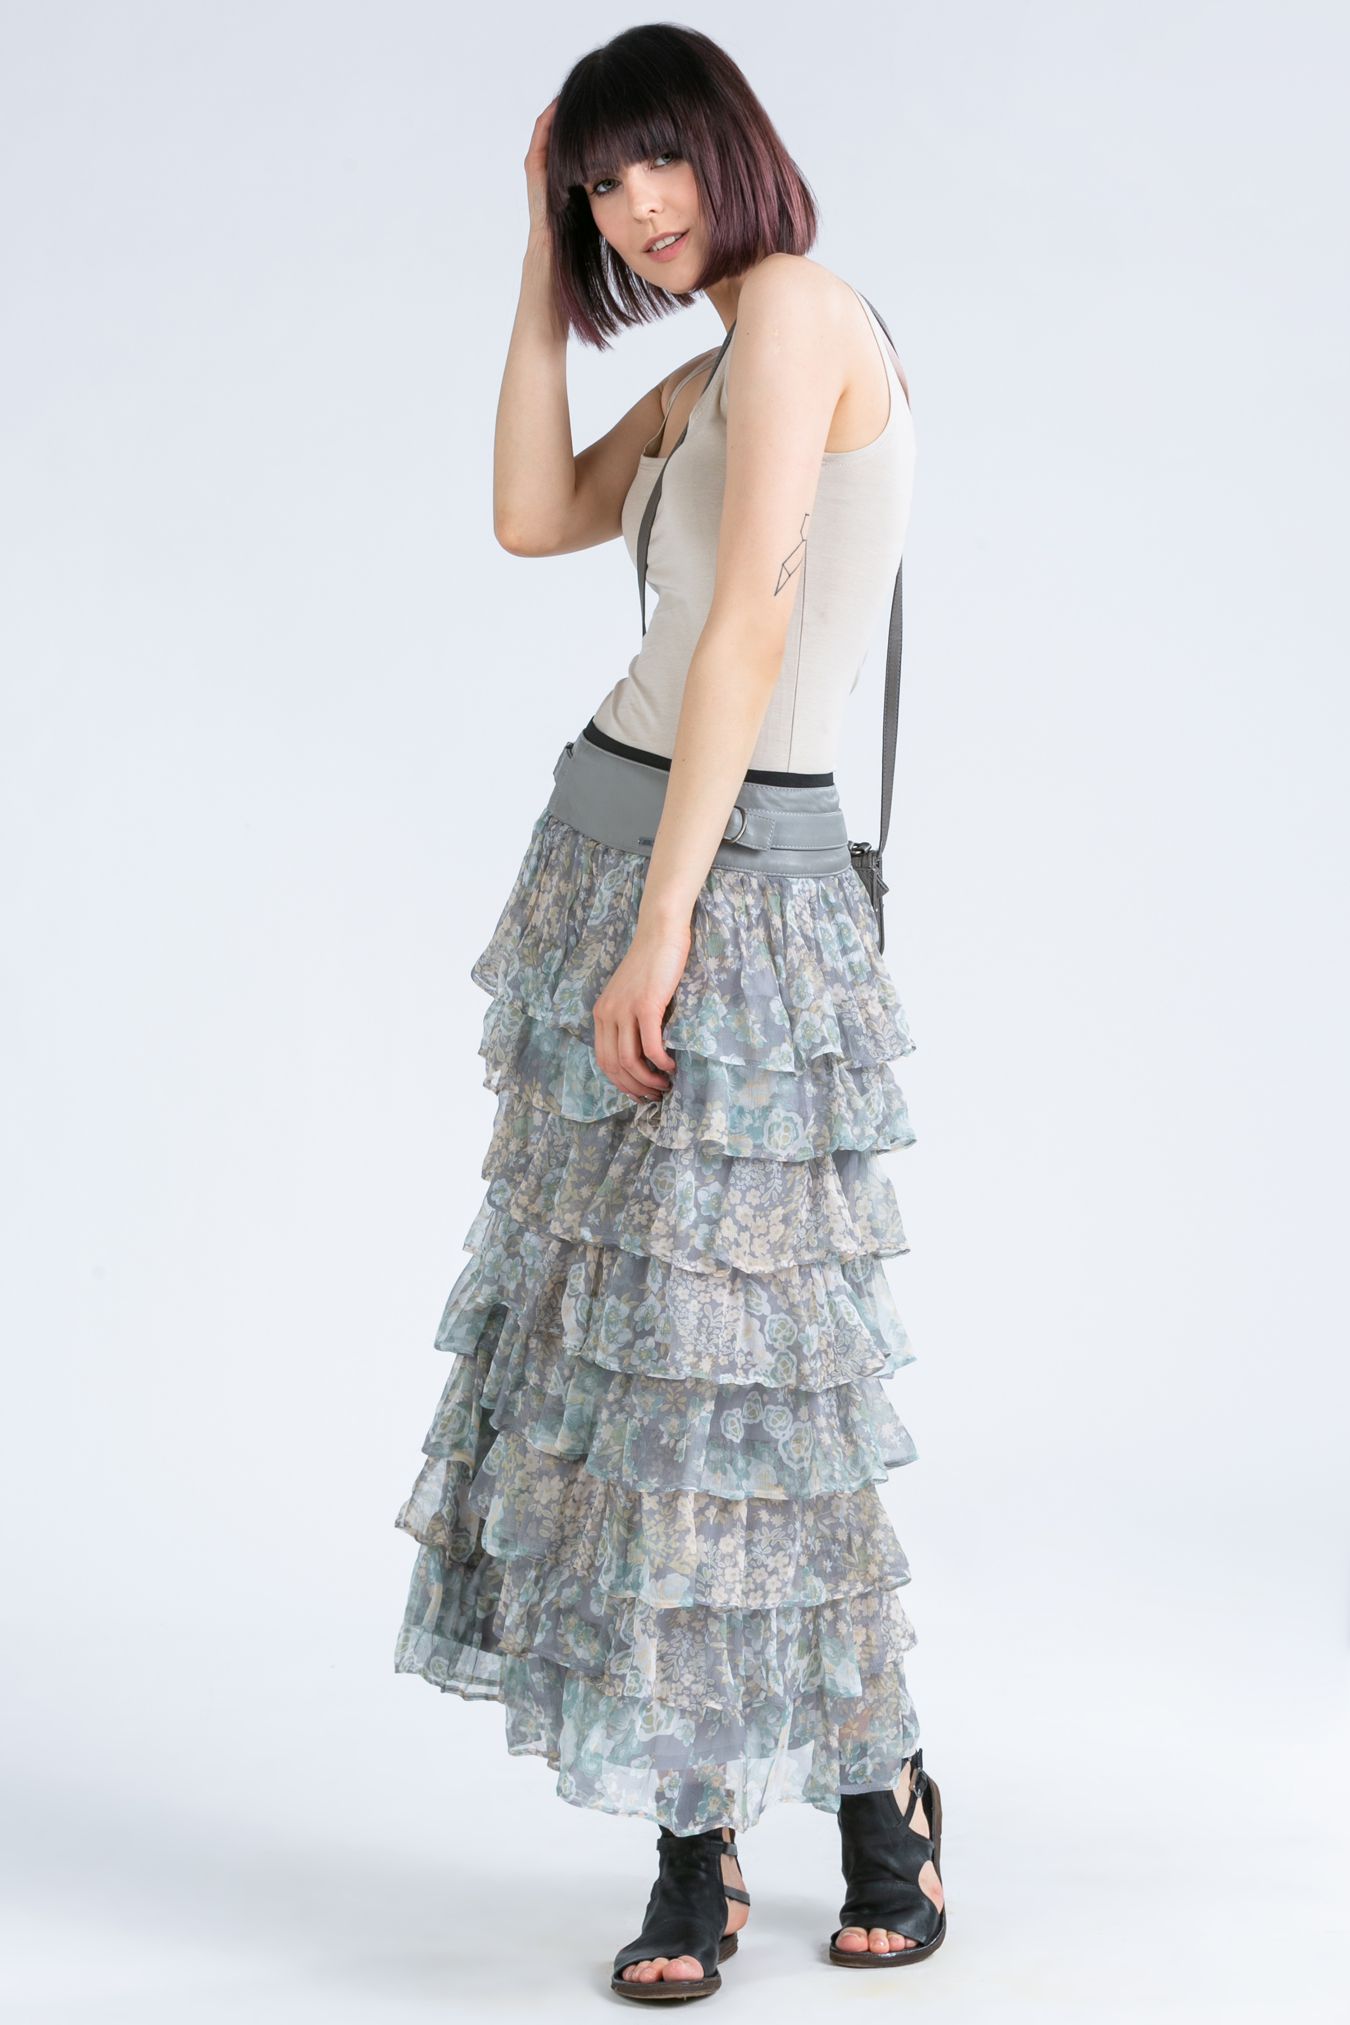 maxi skirt made of silk and leather, silk skirt with a leather yoke and ruffles, floral pattern skirt, ash maxi skirt, long skirt with a yoke made of natural leather and silk chiffon